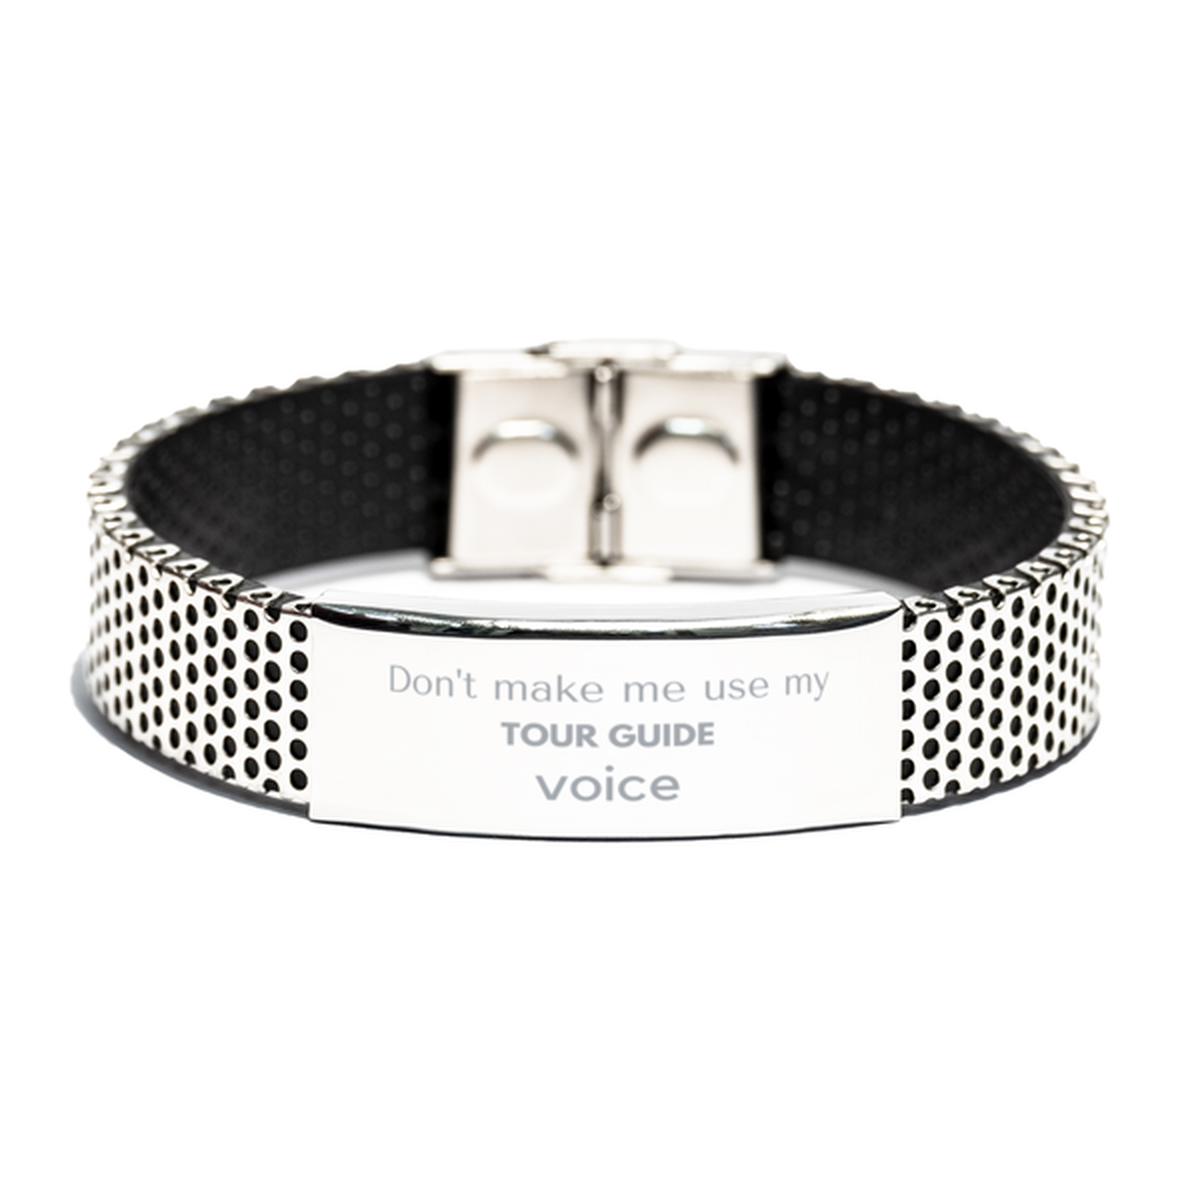 Don't make me use my Tour Guide voice, Sarcasm Tour Guide Gifts, Christmas Tour Guide Stainless Steel Bracelet Birthday Unique Gifts For Tour Guide Coworkers, Men, Women, Colleague, Friends